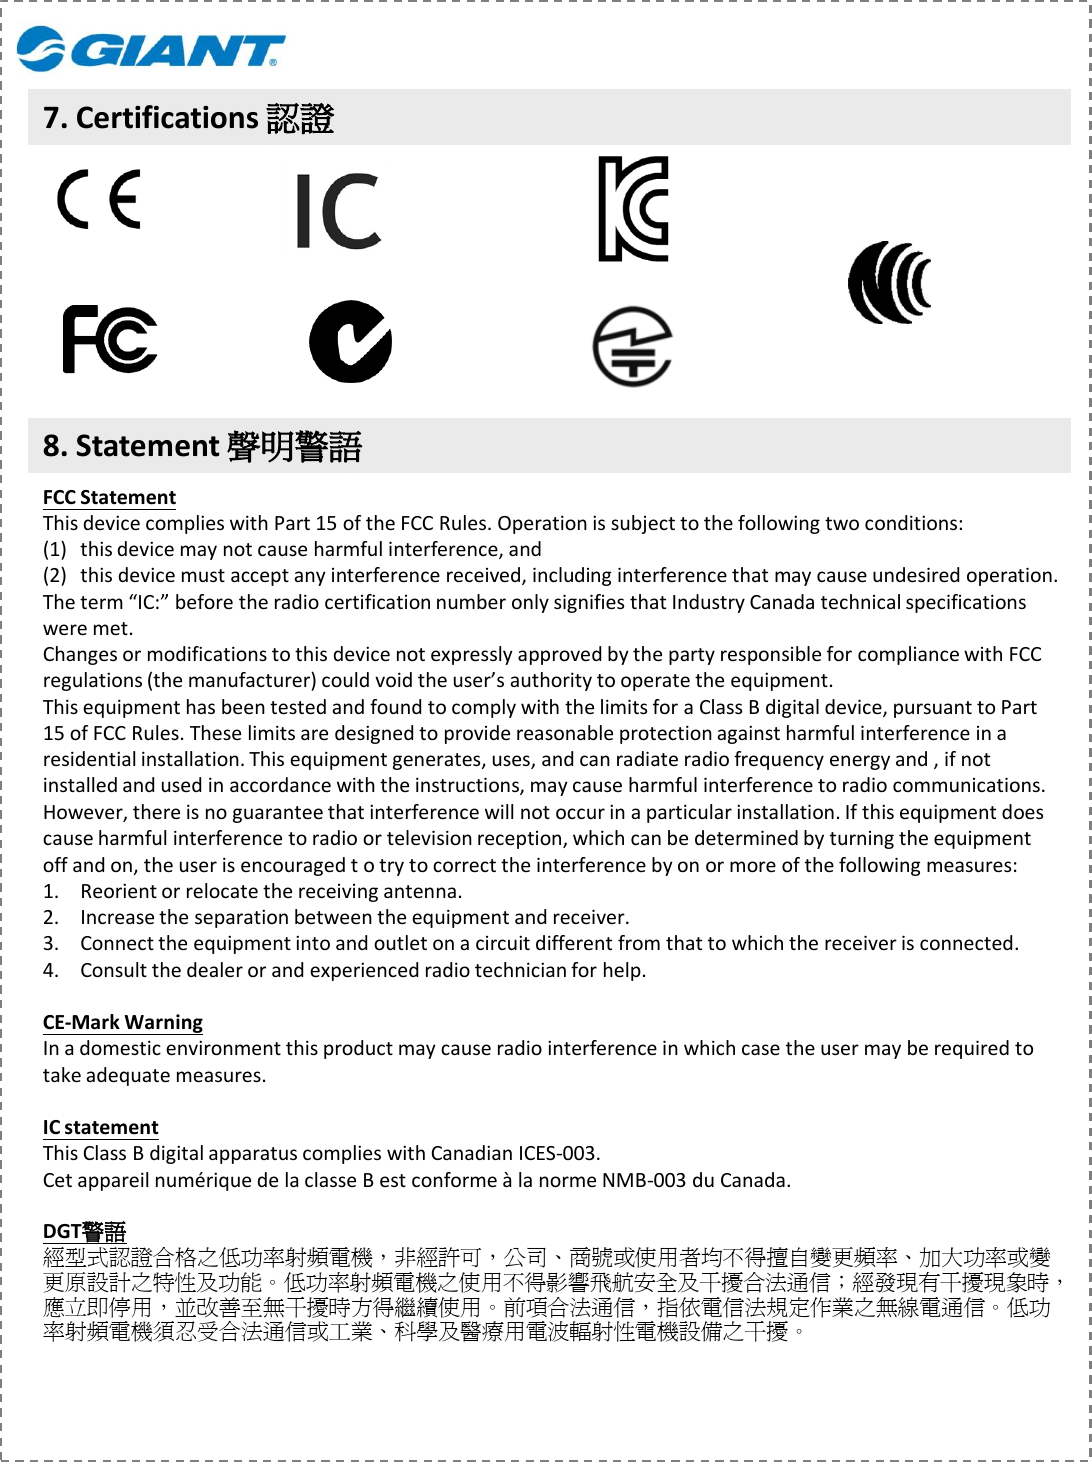 8. Statement 聲明警語7. Certifications 認證FCC StatementThis device complies with Part 15 of the FCC Rules. Operation is subject to the following two conditions: (1) this device may not cause harmful interference, and (2) this device must accept any interference received, including interference that may cause undesired operation.The term “IC:” before the radio certification number only signifies that Industry Canada technical specifications were met.Changes or modifications to this device not expressly approved by the party responsible for compliance with FCC regulations (the manufacturer) could void the user’s authority to operate the equipment.This equipment has been tested and found to comply with the limits for a Class B digital device, pursuant to Part 15 of FCC Rules. These limits are designed to provide reasonable protection against harmful interference in a residential installation. This equipment generates, uses, and can radiate radio frequency energy and , if not installed and used in accordance with the instructions, may cause harmful interference to radio communications. However, there is no guarantee that interference will not occur in a particular installation. If this equipment does cause harmful interference to radio or television reception, which can be determined by turning the equipment off and on, the user is encouraged t o try to correct the interference by on or more of the following measures:1. Reorient or relocate the receiving antenna.2. Increase the separation between the equipment and receiver.3. Connect the equipment into and outlet on a circuit different from that to which the receiver is connected.4. Consult the dealer or and experienced radio technician for help.CE-Mark WarningIn a domestic environment this product may cause radio interference in which case the user may be required to take adequate measures.IC statementThis Class B digital apparatus complies with Canadian ICES-003.Cet appareil numérique de la classe B est conforme à la norme NMB-003 du Canada.DGT警語經型式認證合格之低功率射頻電機，非經許可，公司、商號或使用者均不得擅自變更頻率、加大功率或變更原設計之特性及功能。低功率射頻電機之使用不得影響飛航安全及干擾合法通信；經發現有干擾現象時，應立即停用，並改善至無干擾時方得繼續使用。前項合法通信，指依電信法規定作業之無線電通信。低功率射頻電機須忍受合法通信或工業、科學及醫療用電波輻射性電機設備之干擾。